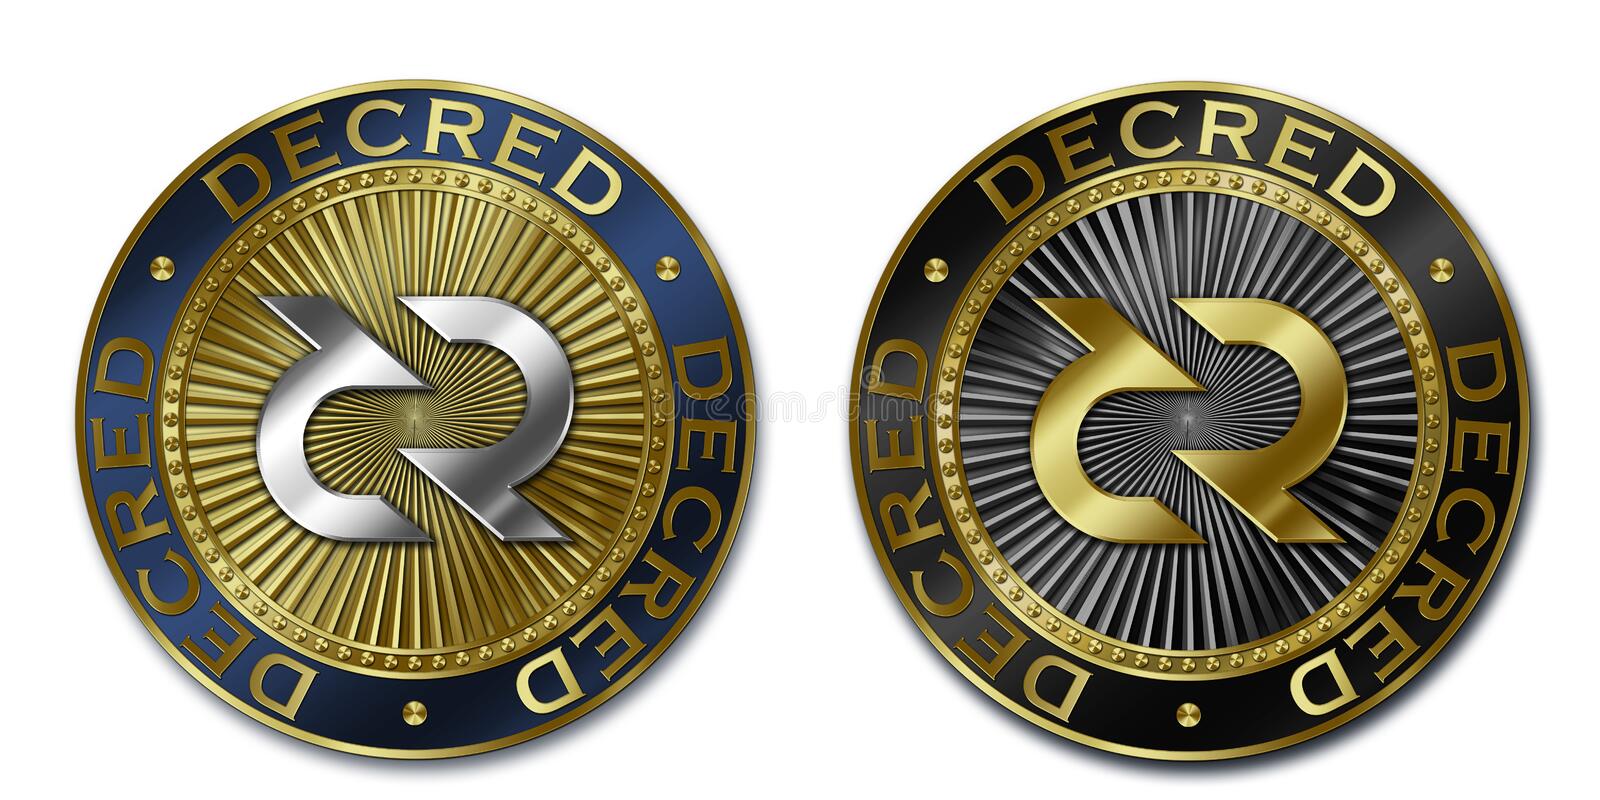 Original Luxury Illustration Cryptocurrency Gold Silver Coin Cryptocurrency Decred Coin 107048980